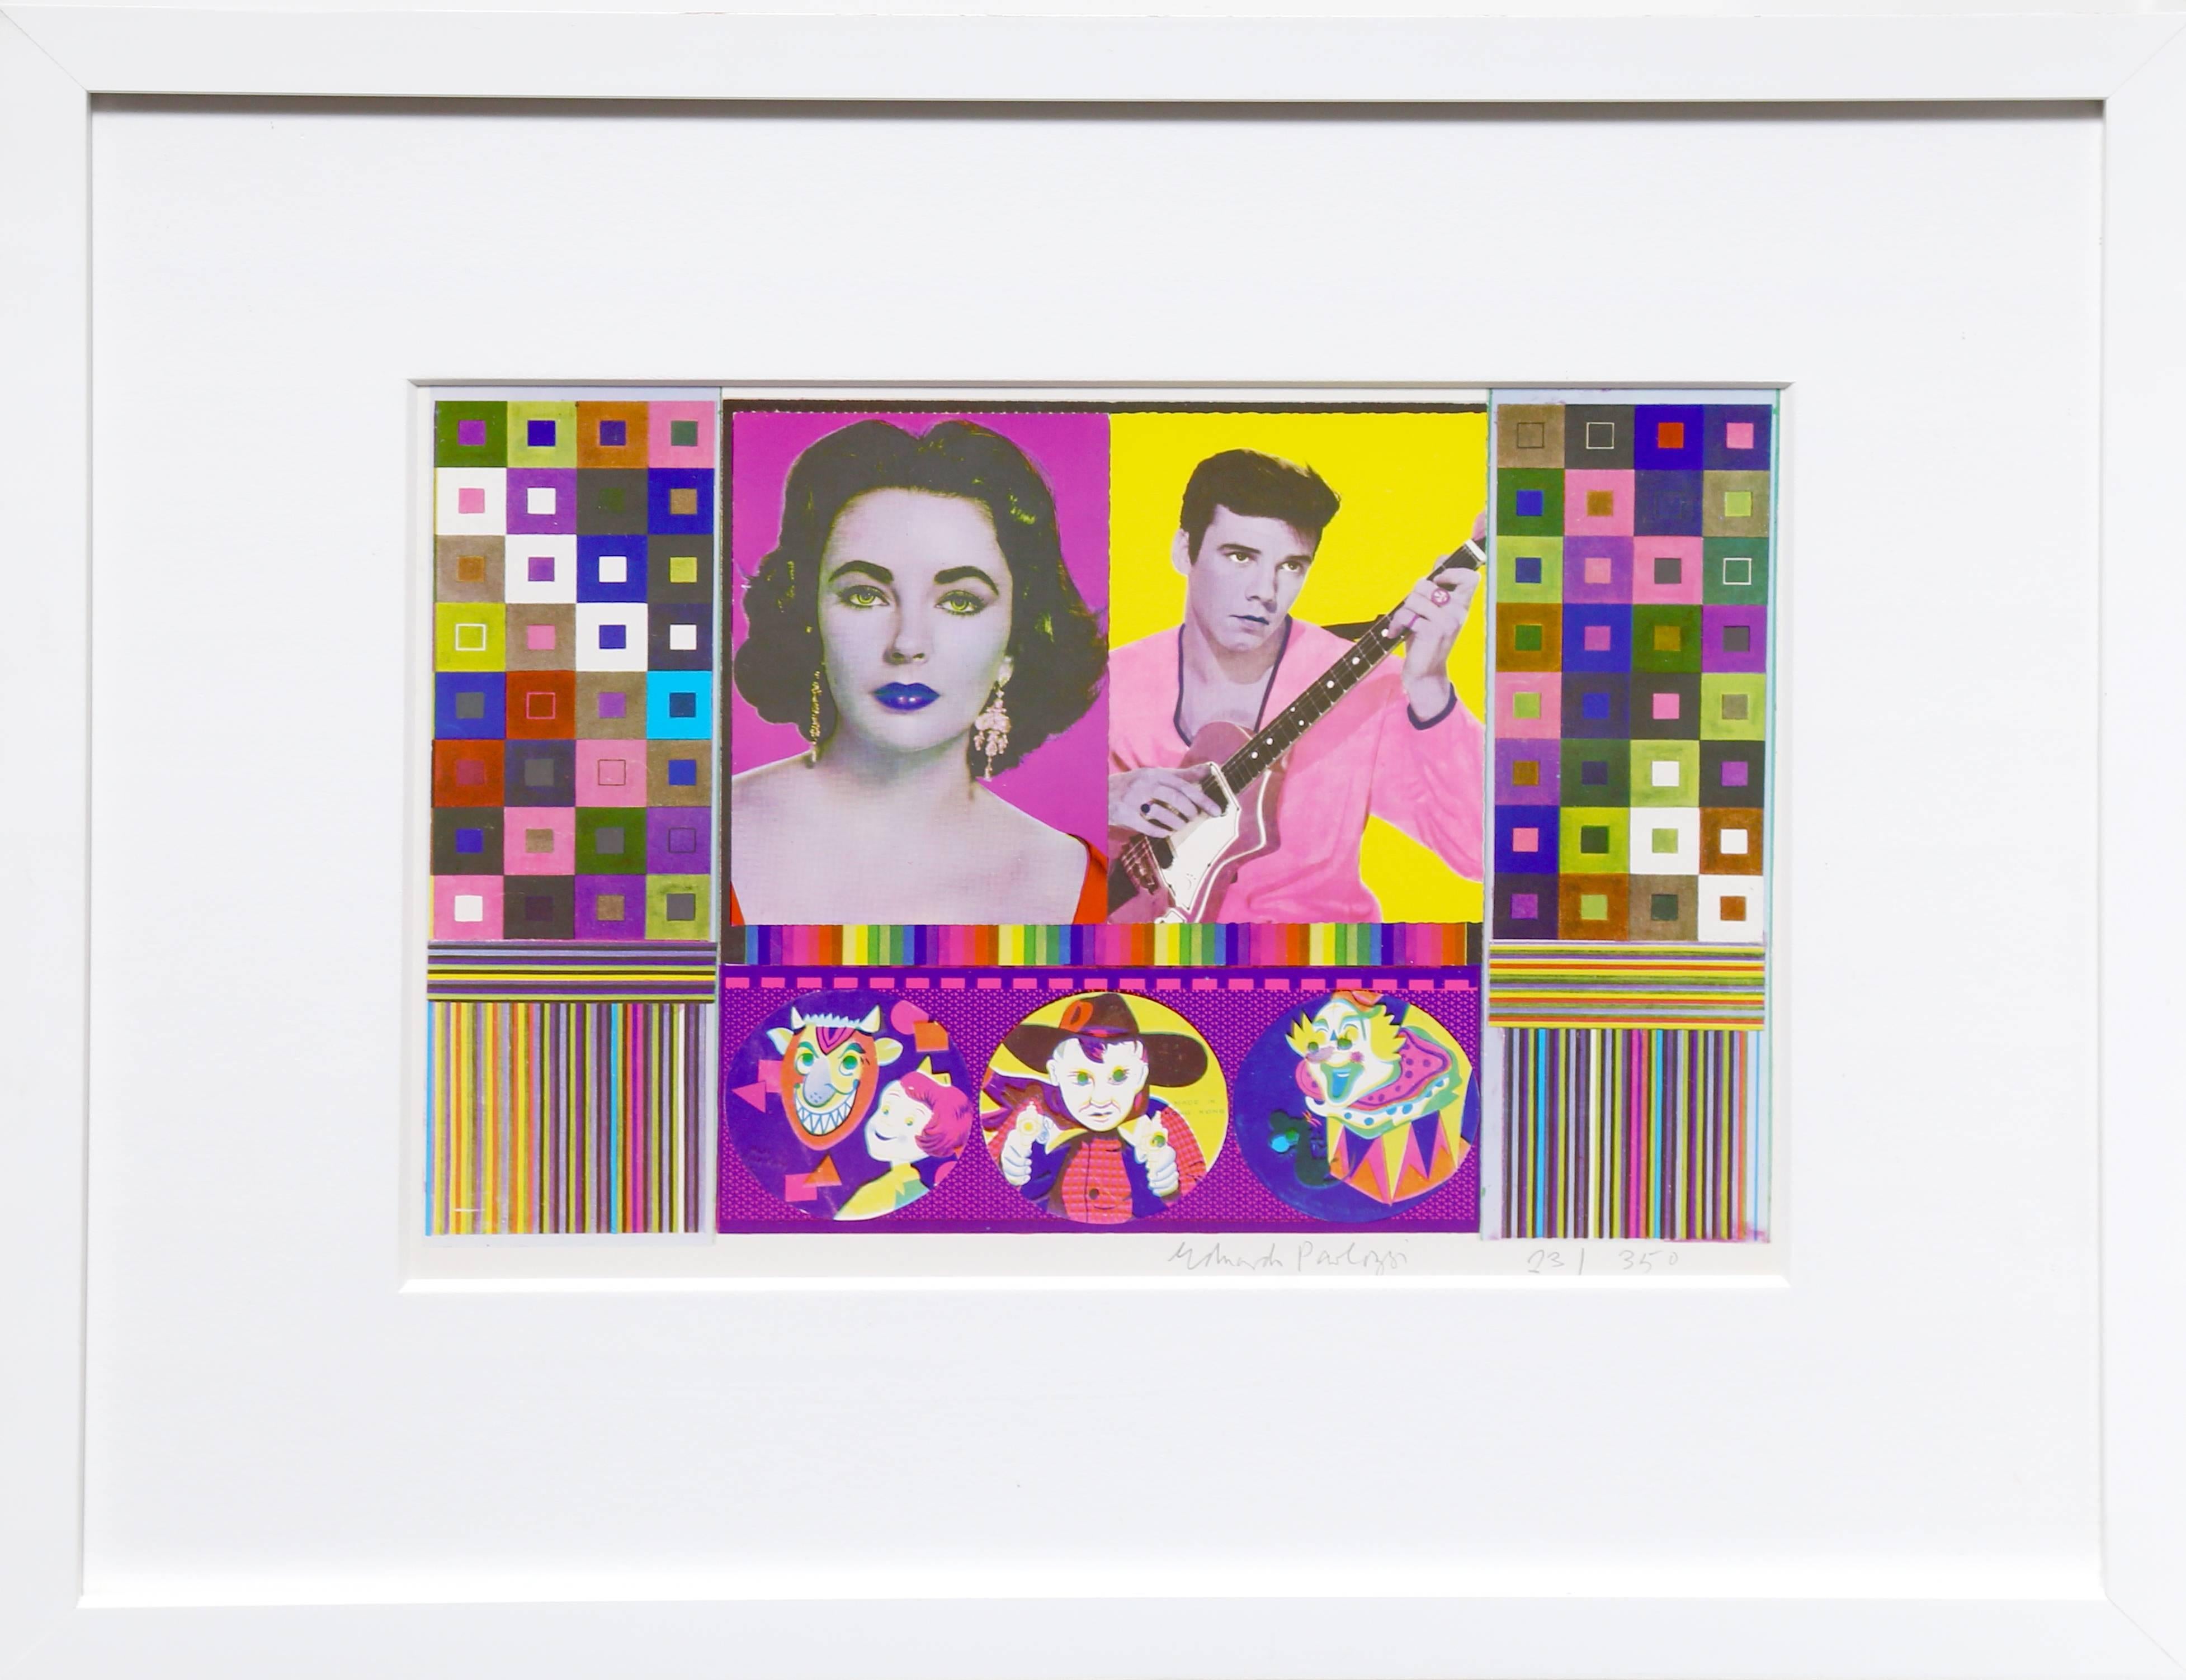 Eduardo Paolozzi Figurative Print - An Empire of Silly Statistics  A Fake War for Public Relations